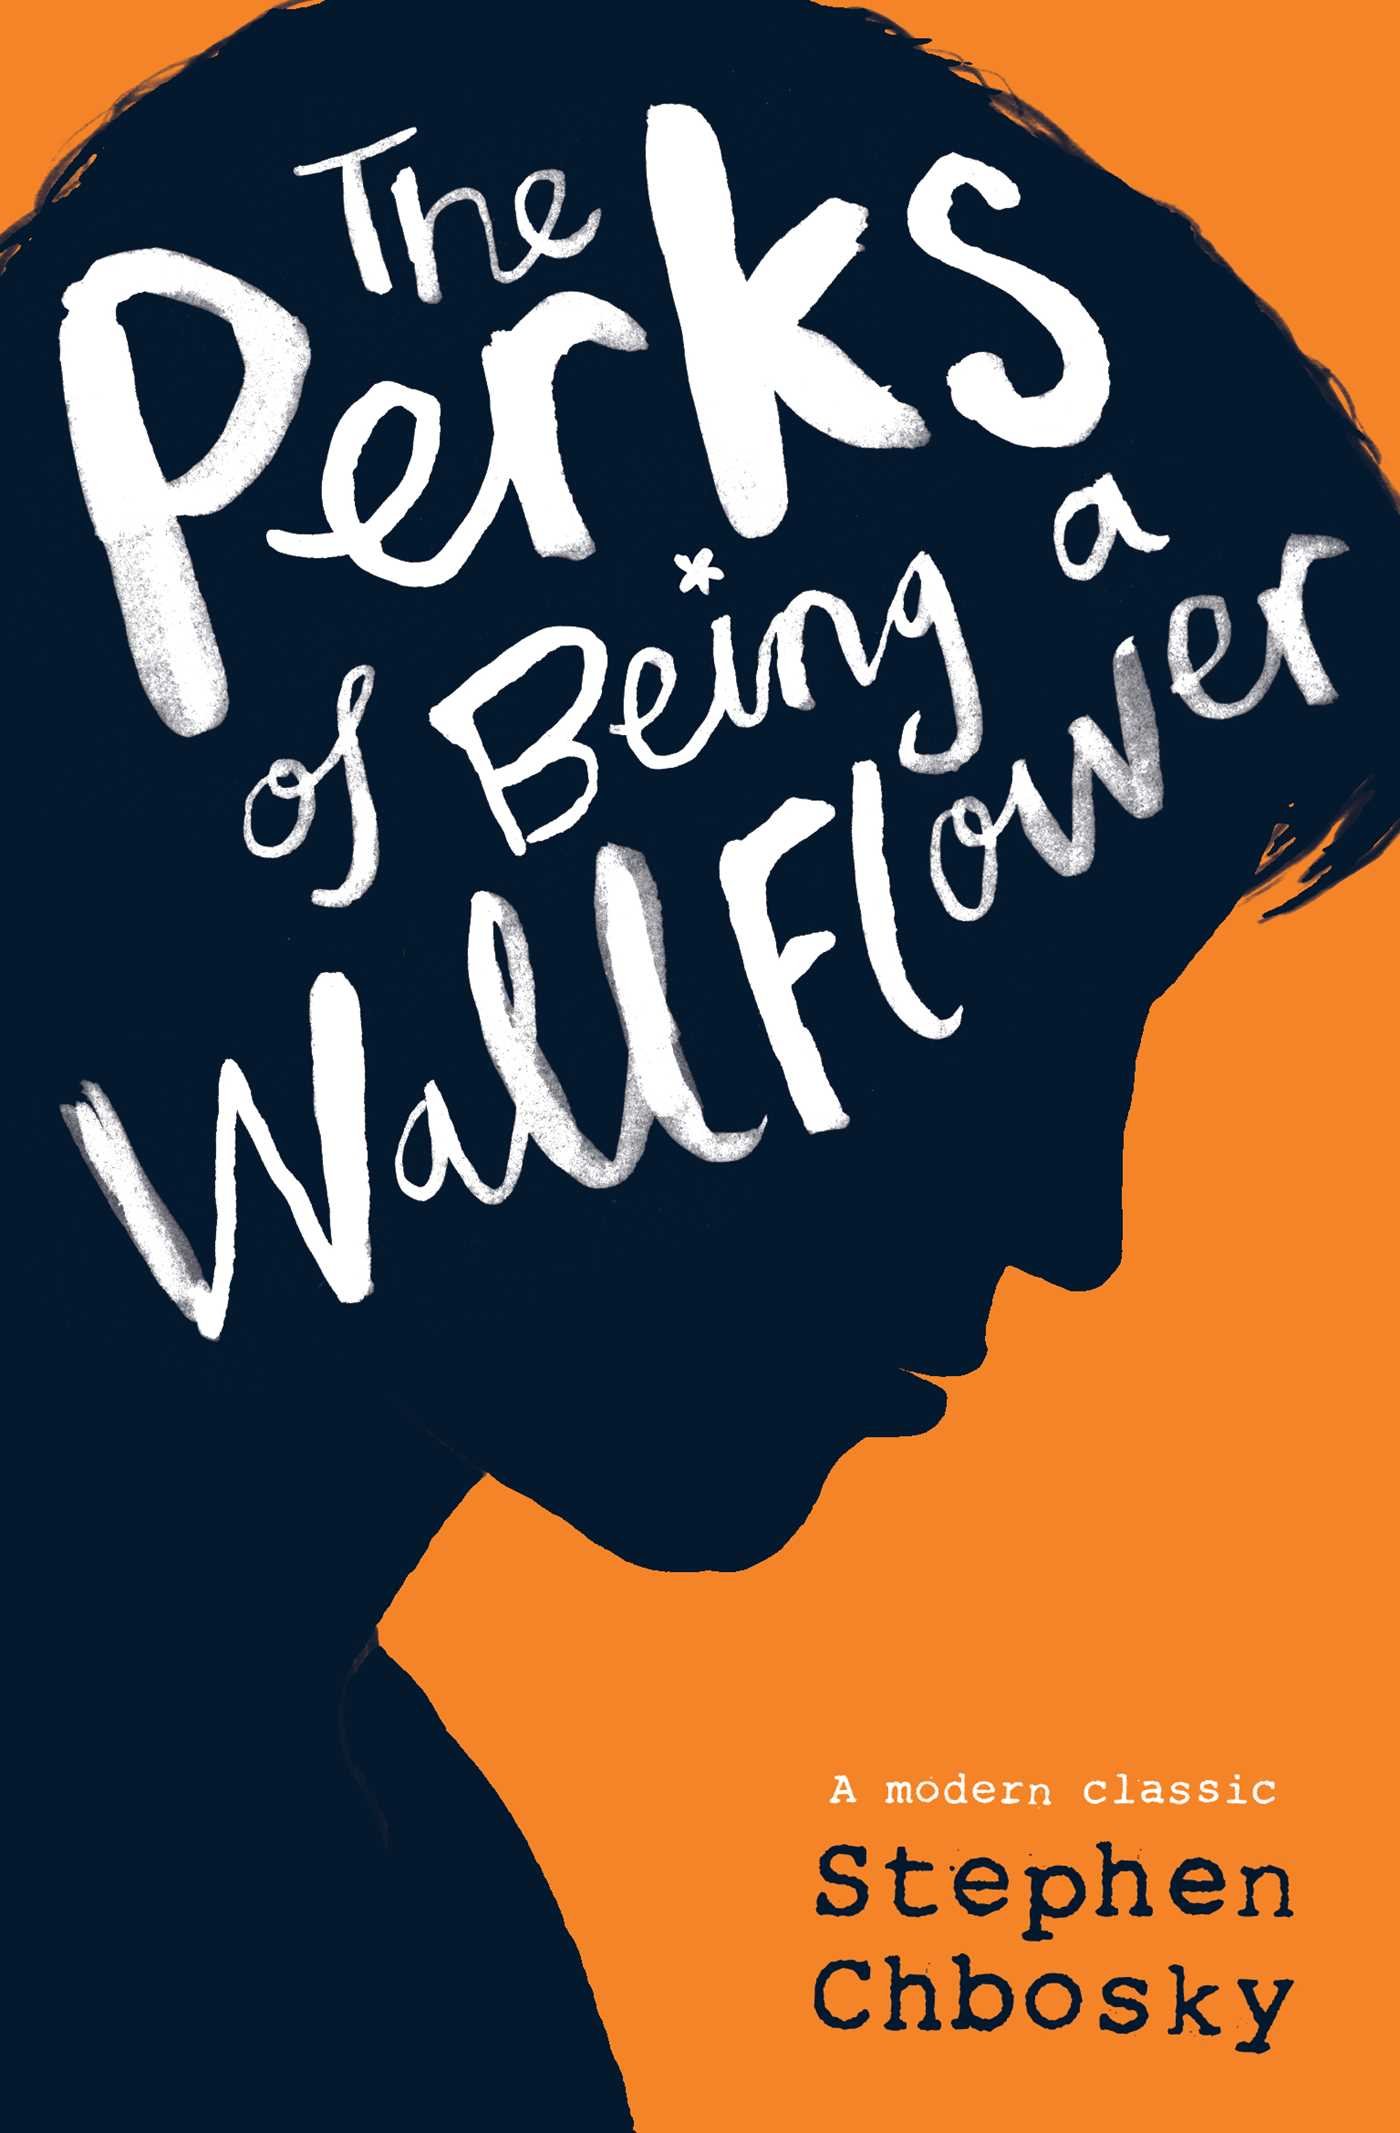 The Perks of Being a Wallflower | Stephen Chbosky